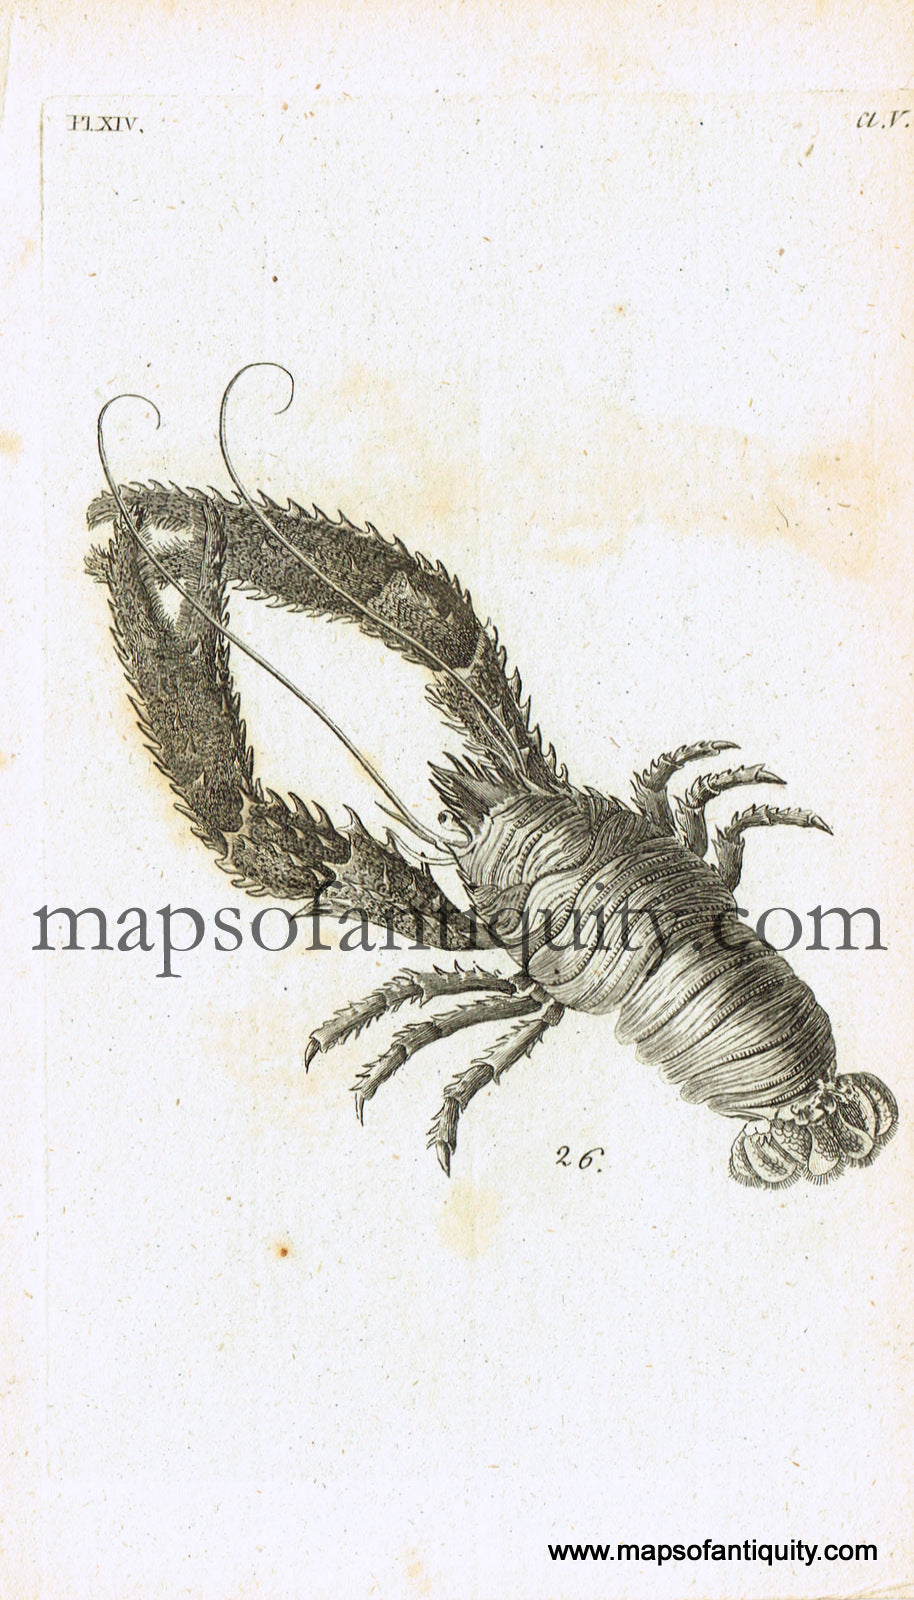 Antique-Black-and-White-Engraved-Illustration-Spiny-Lobster-Antique-Prints-Natural-History-Sea-Shells-c.-1760--Maps-Of-Antiquity